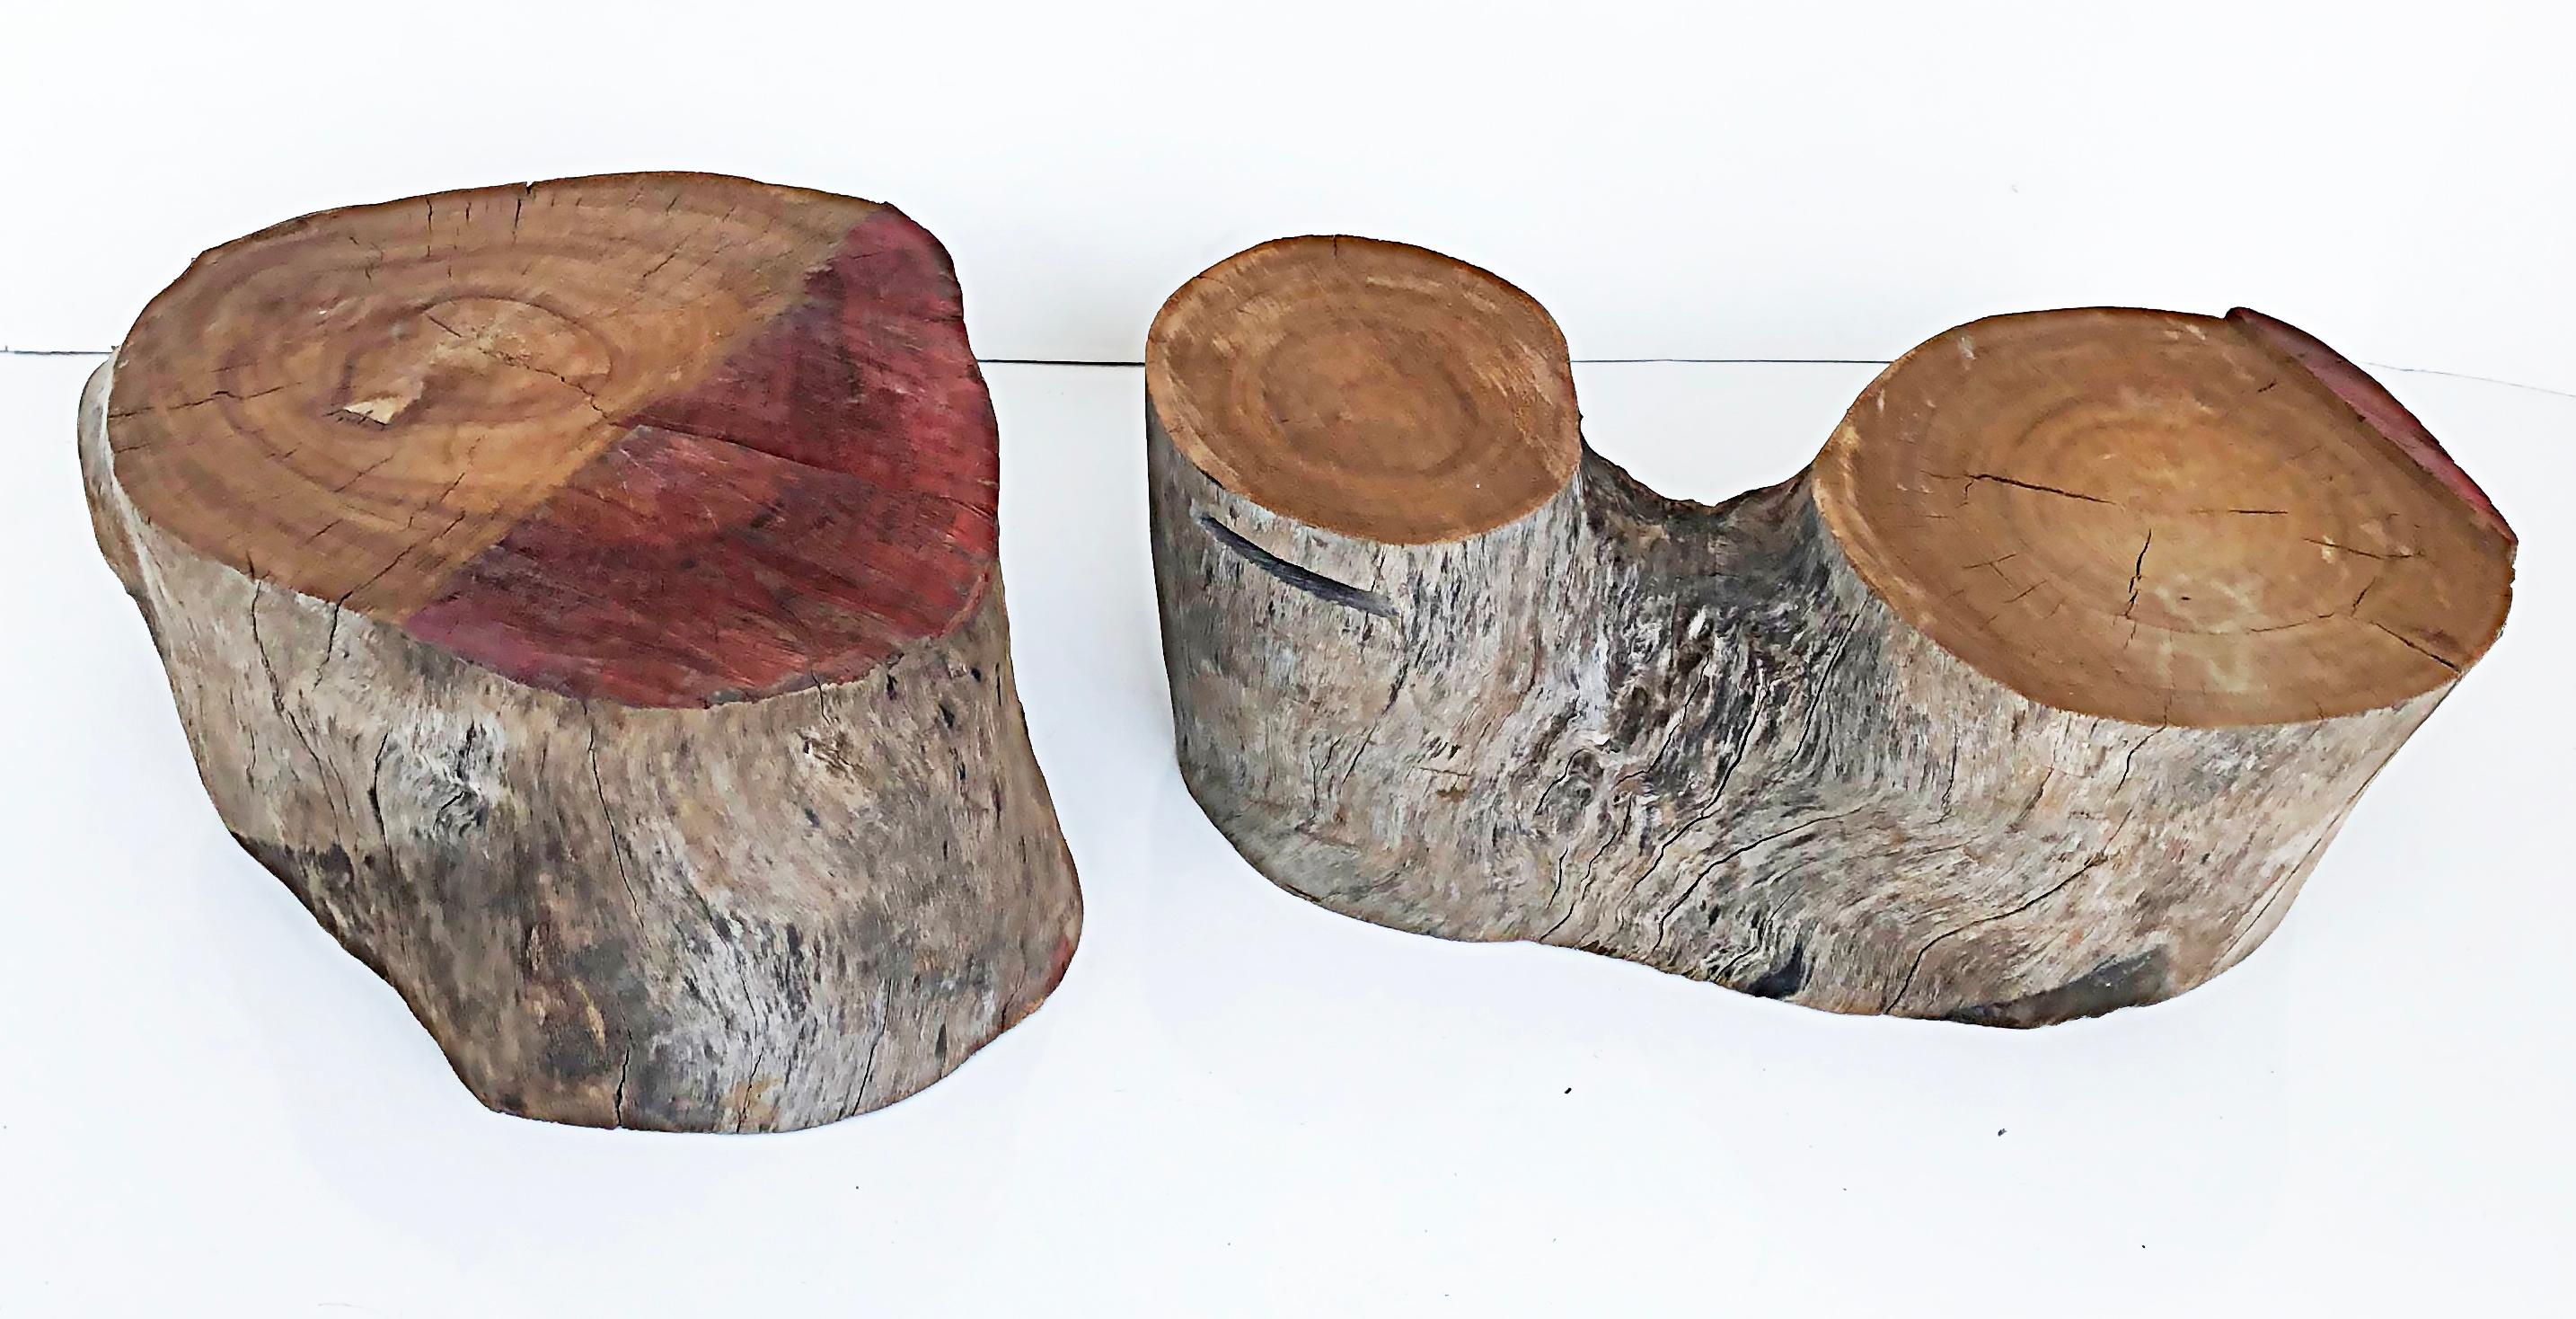 Organic double or single plant stand pedestals

Offered for sale are two individual natural cut logs for use as organic plant stands. They are stable and quite rustic. They can be used either indoors or outside as pedestals.


Measurements: